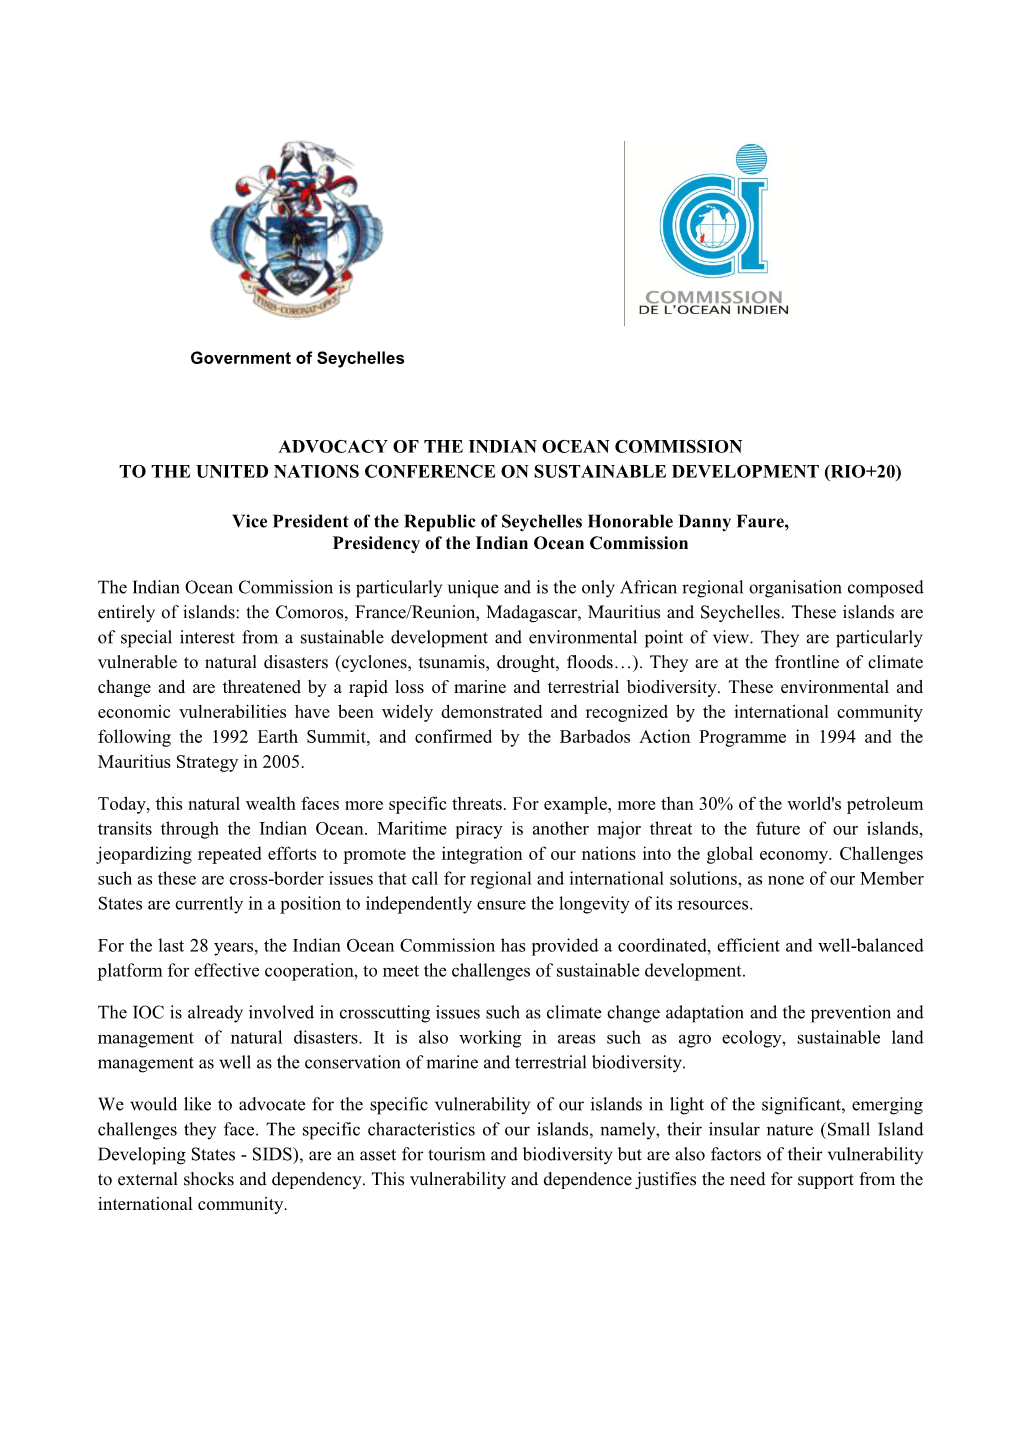 Advocacy of the Indian Ocean Commission to the United Nations Conference on Sustainable Development (Rio+20)